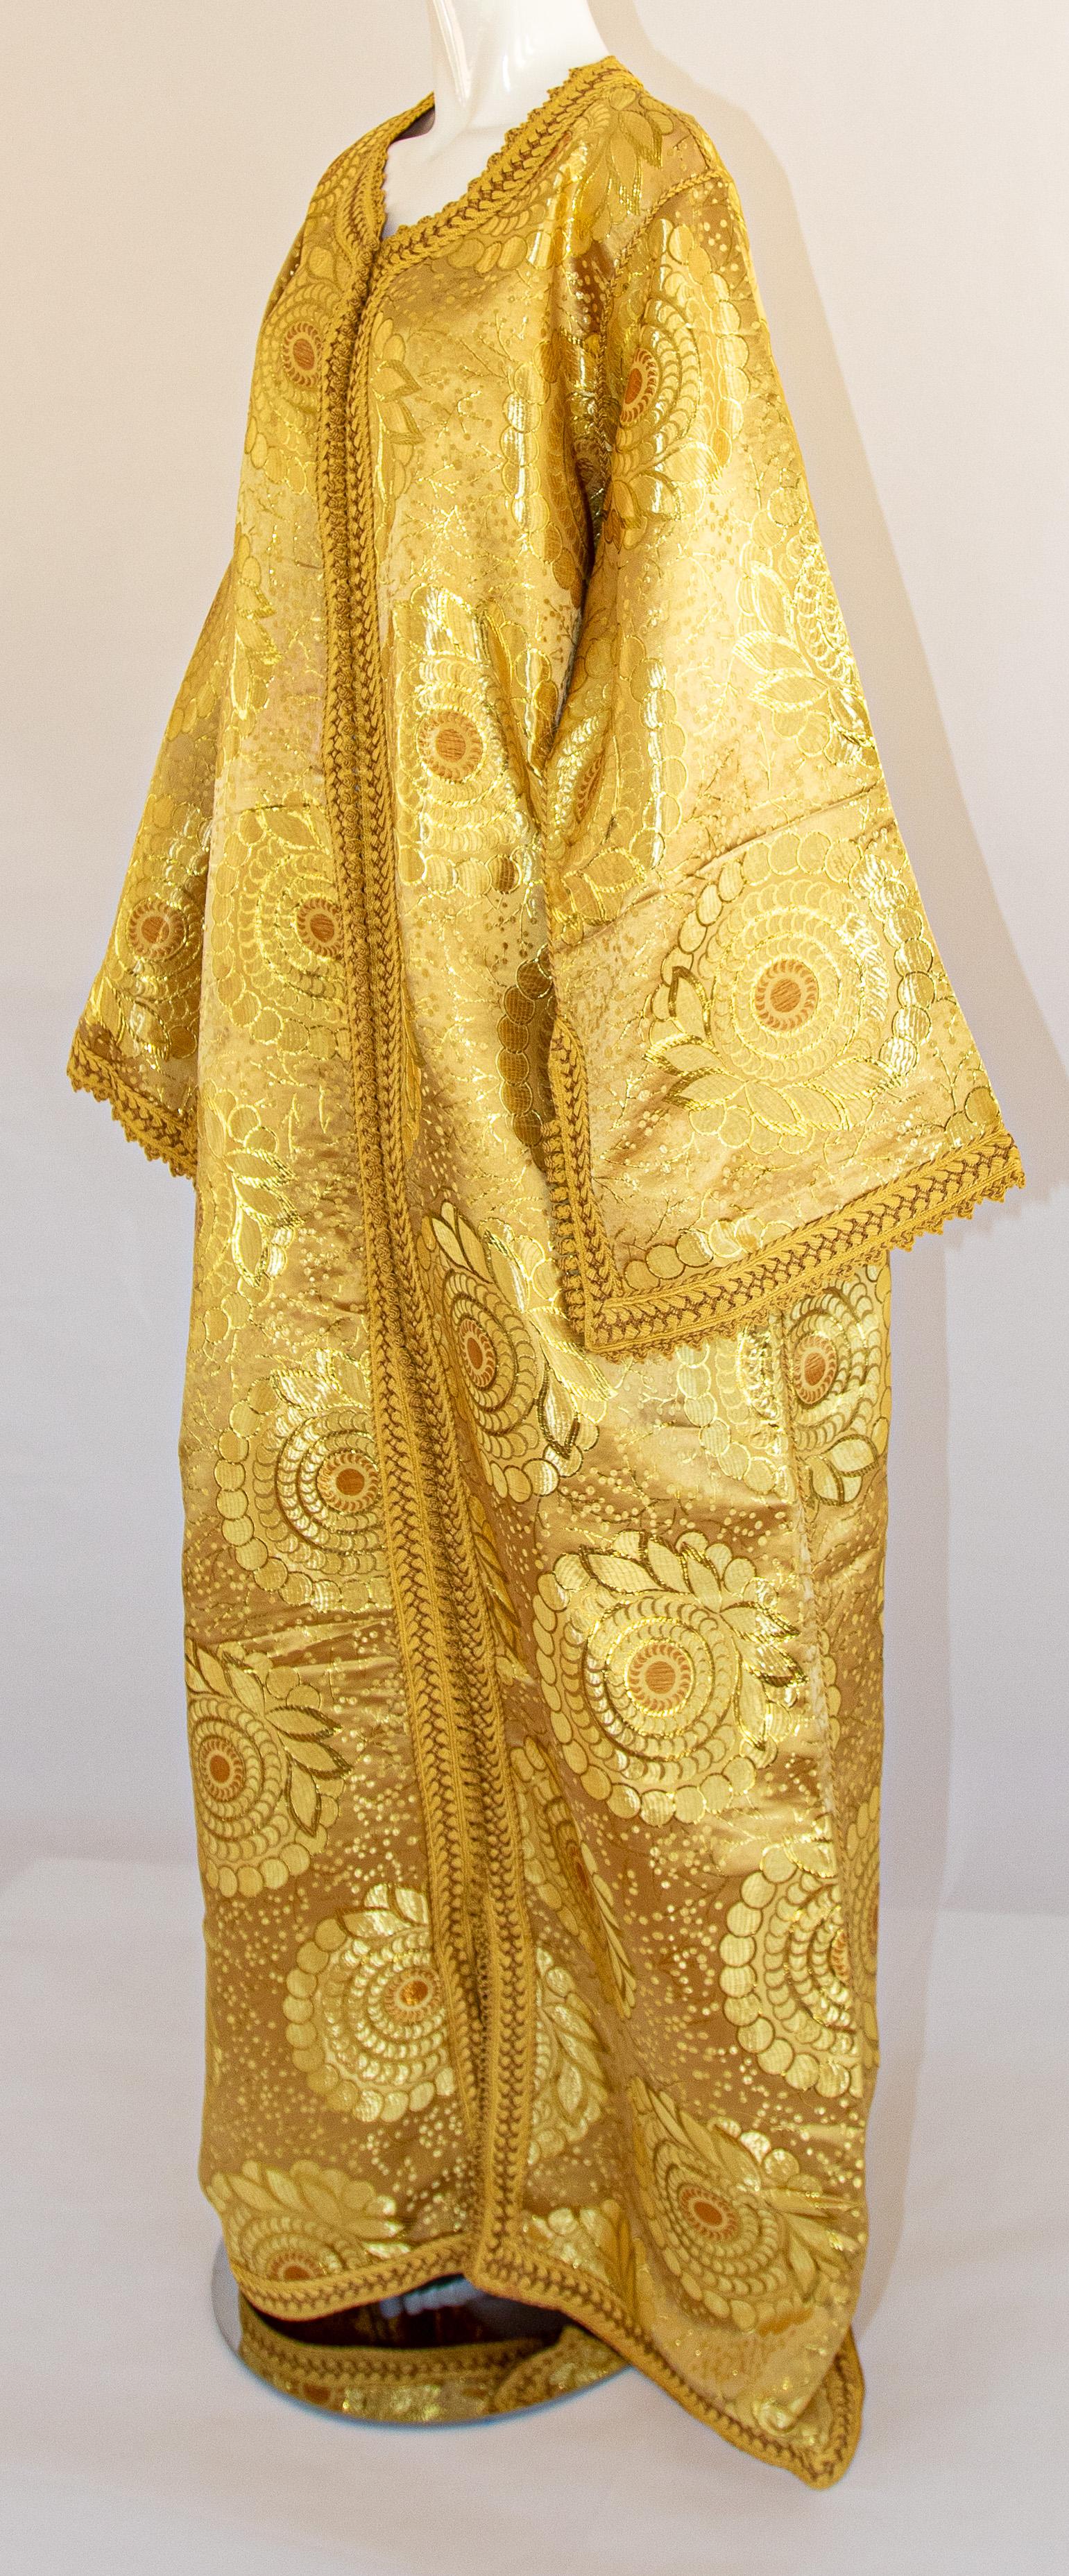 Moroccan Vintage Caftan Gown in Gold Brocade Maxi Dress Kaftan Size L to XL For Sale 2